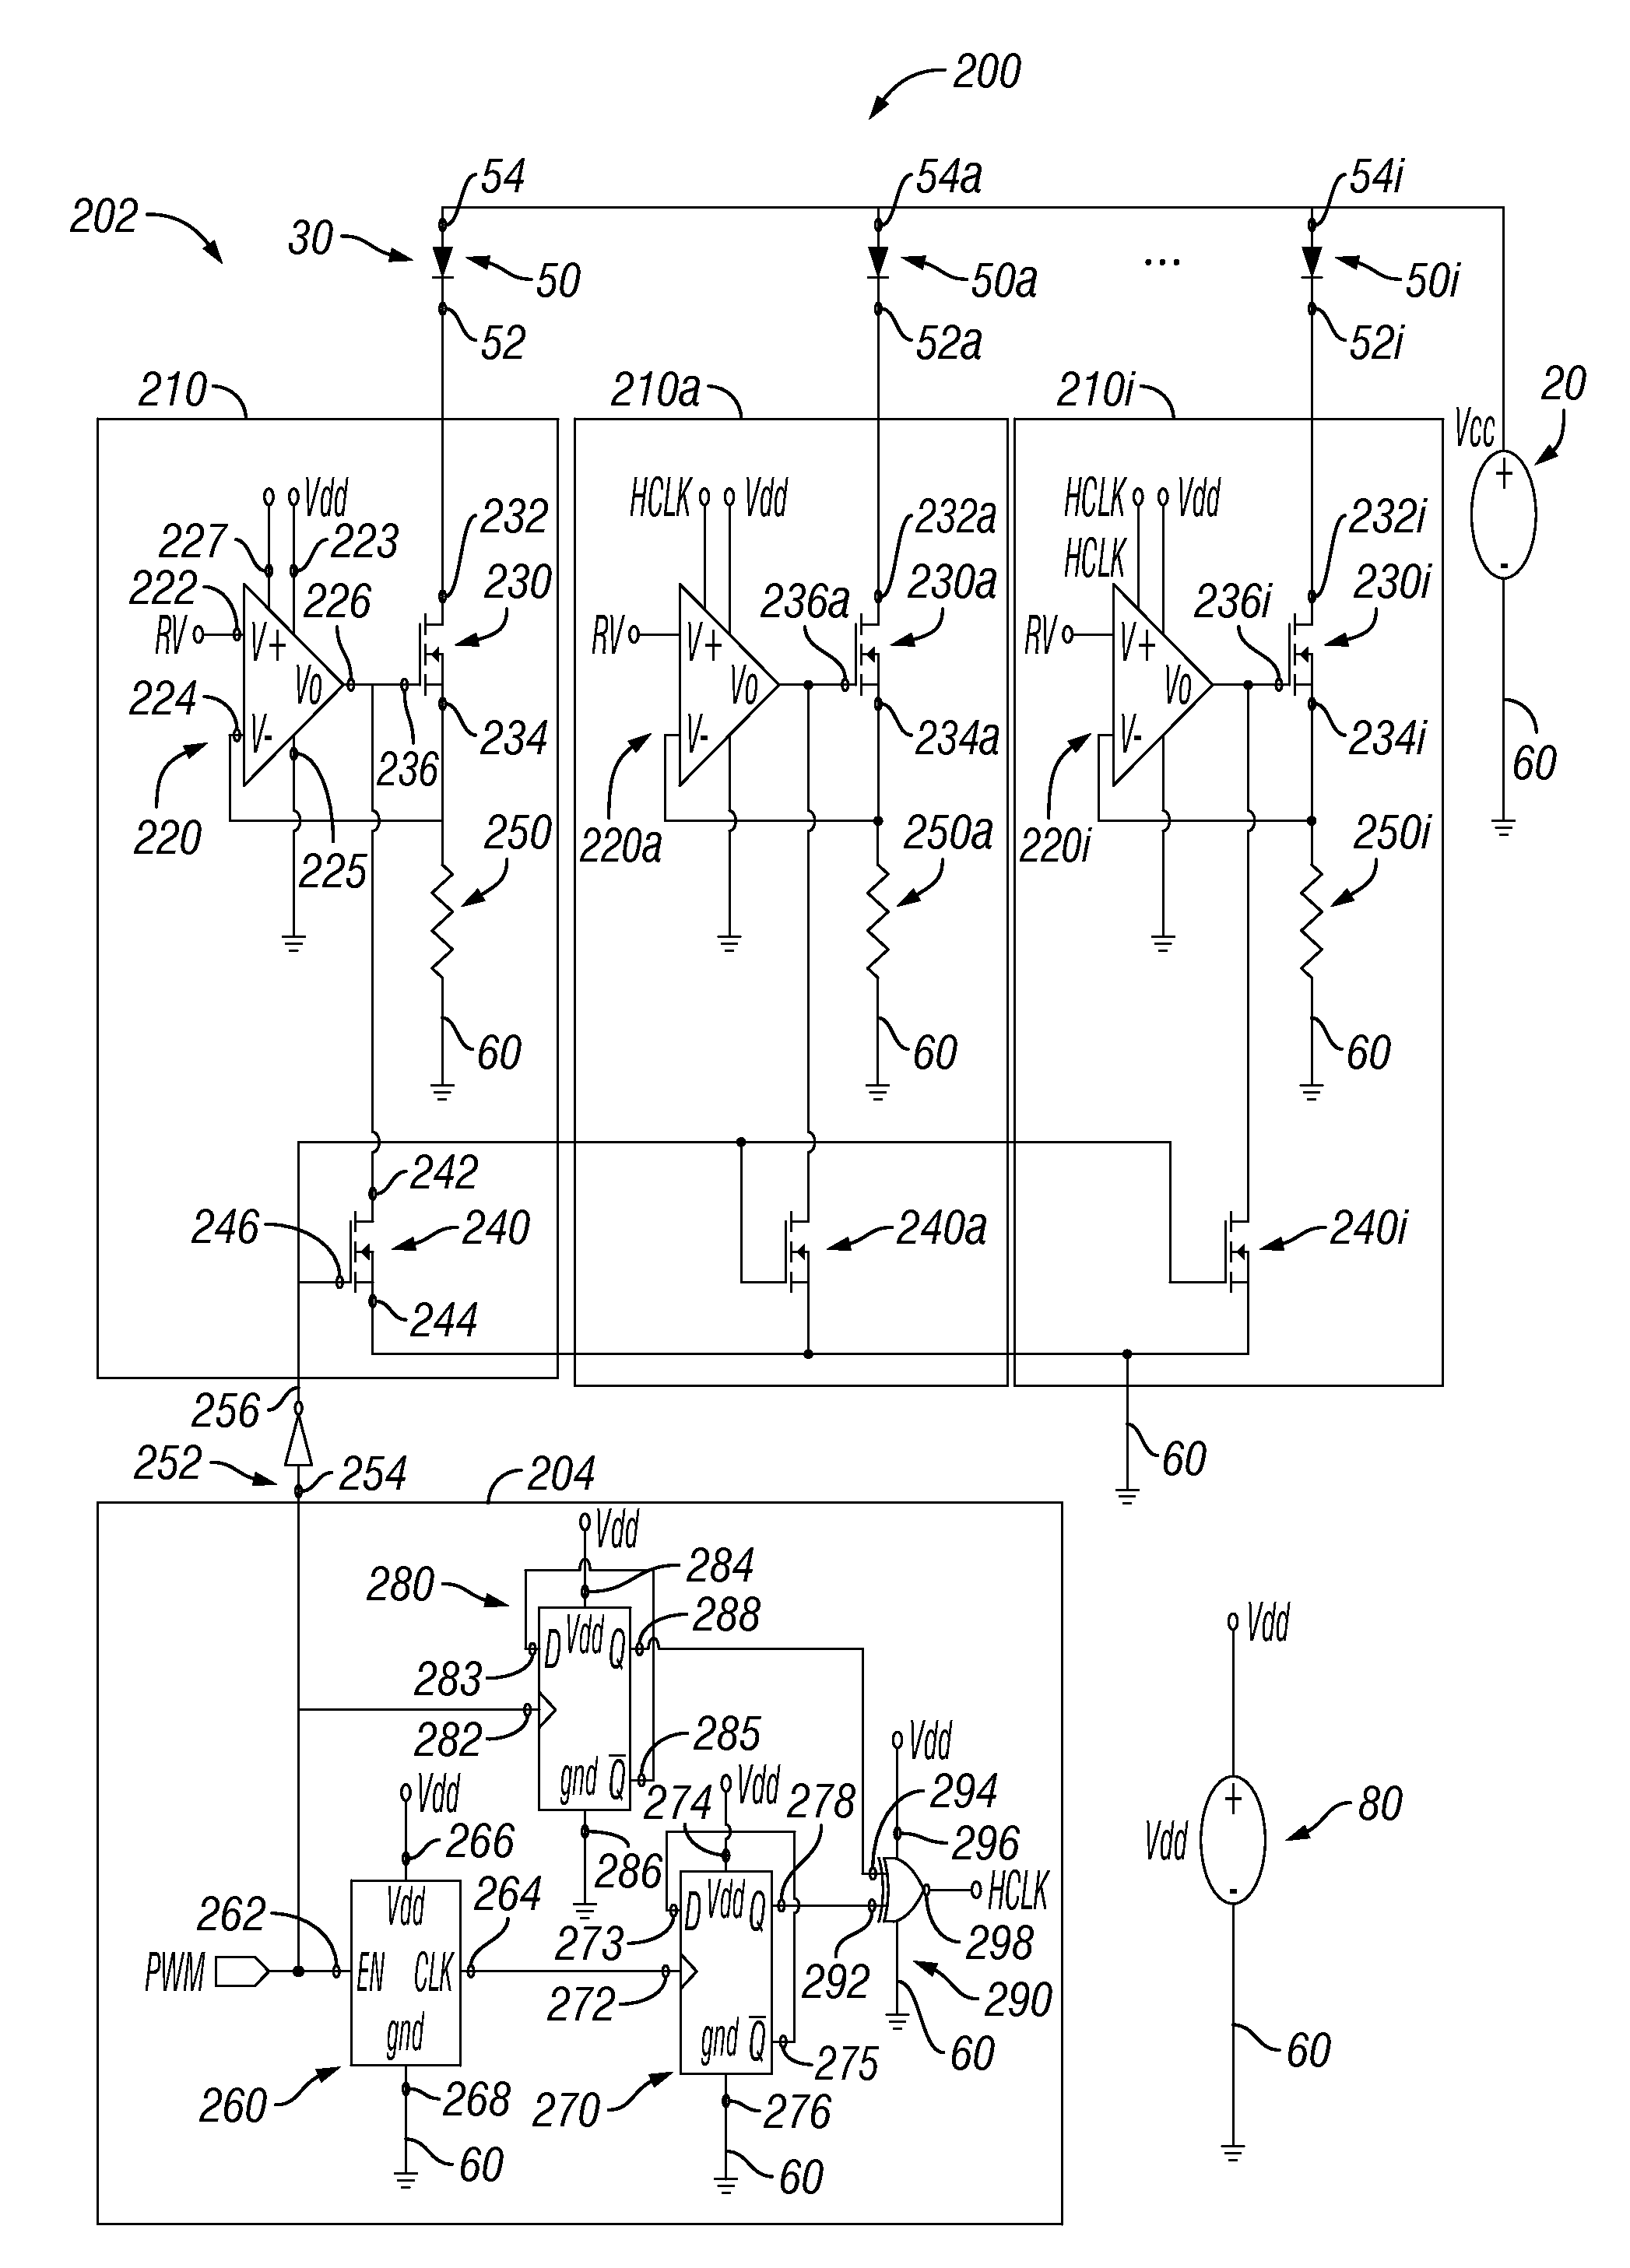 Dynamically controllable drive circuit for parallel array of light emitting diodes